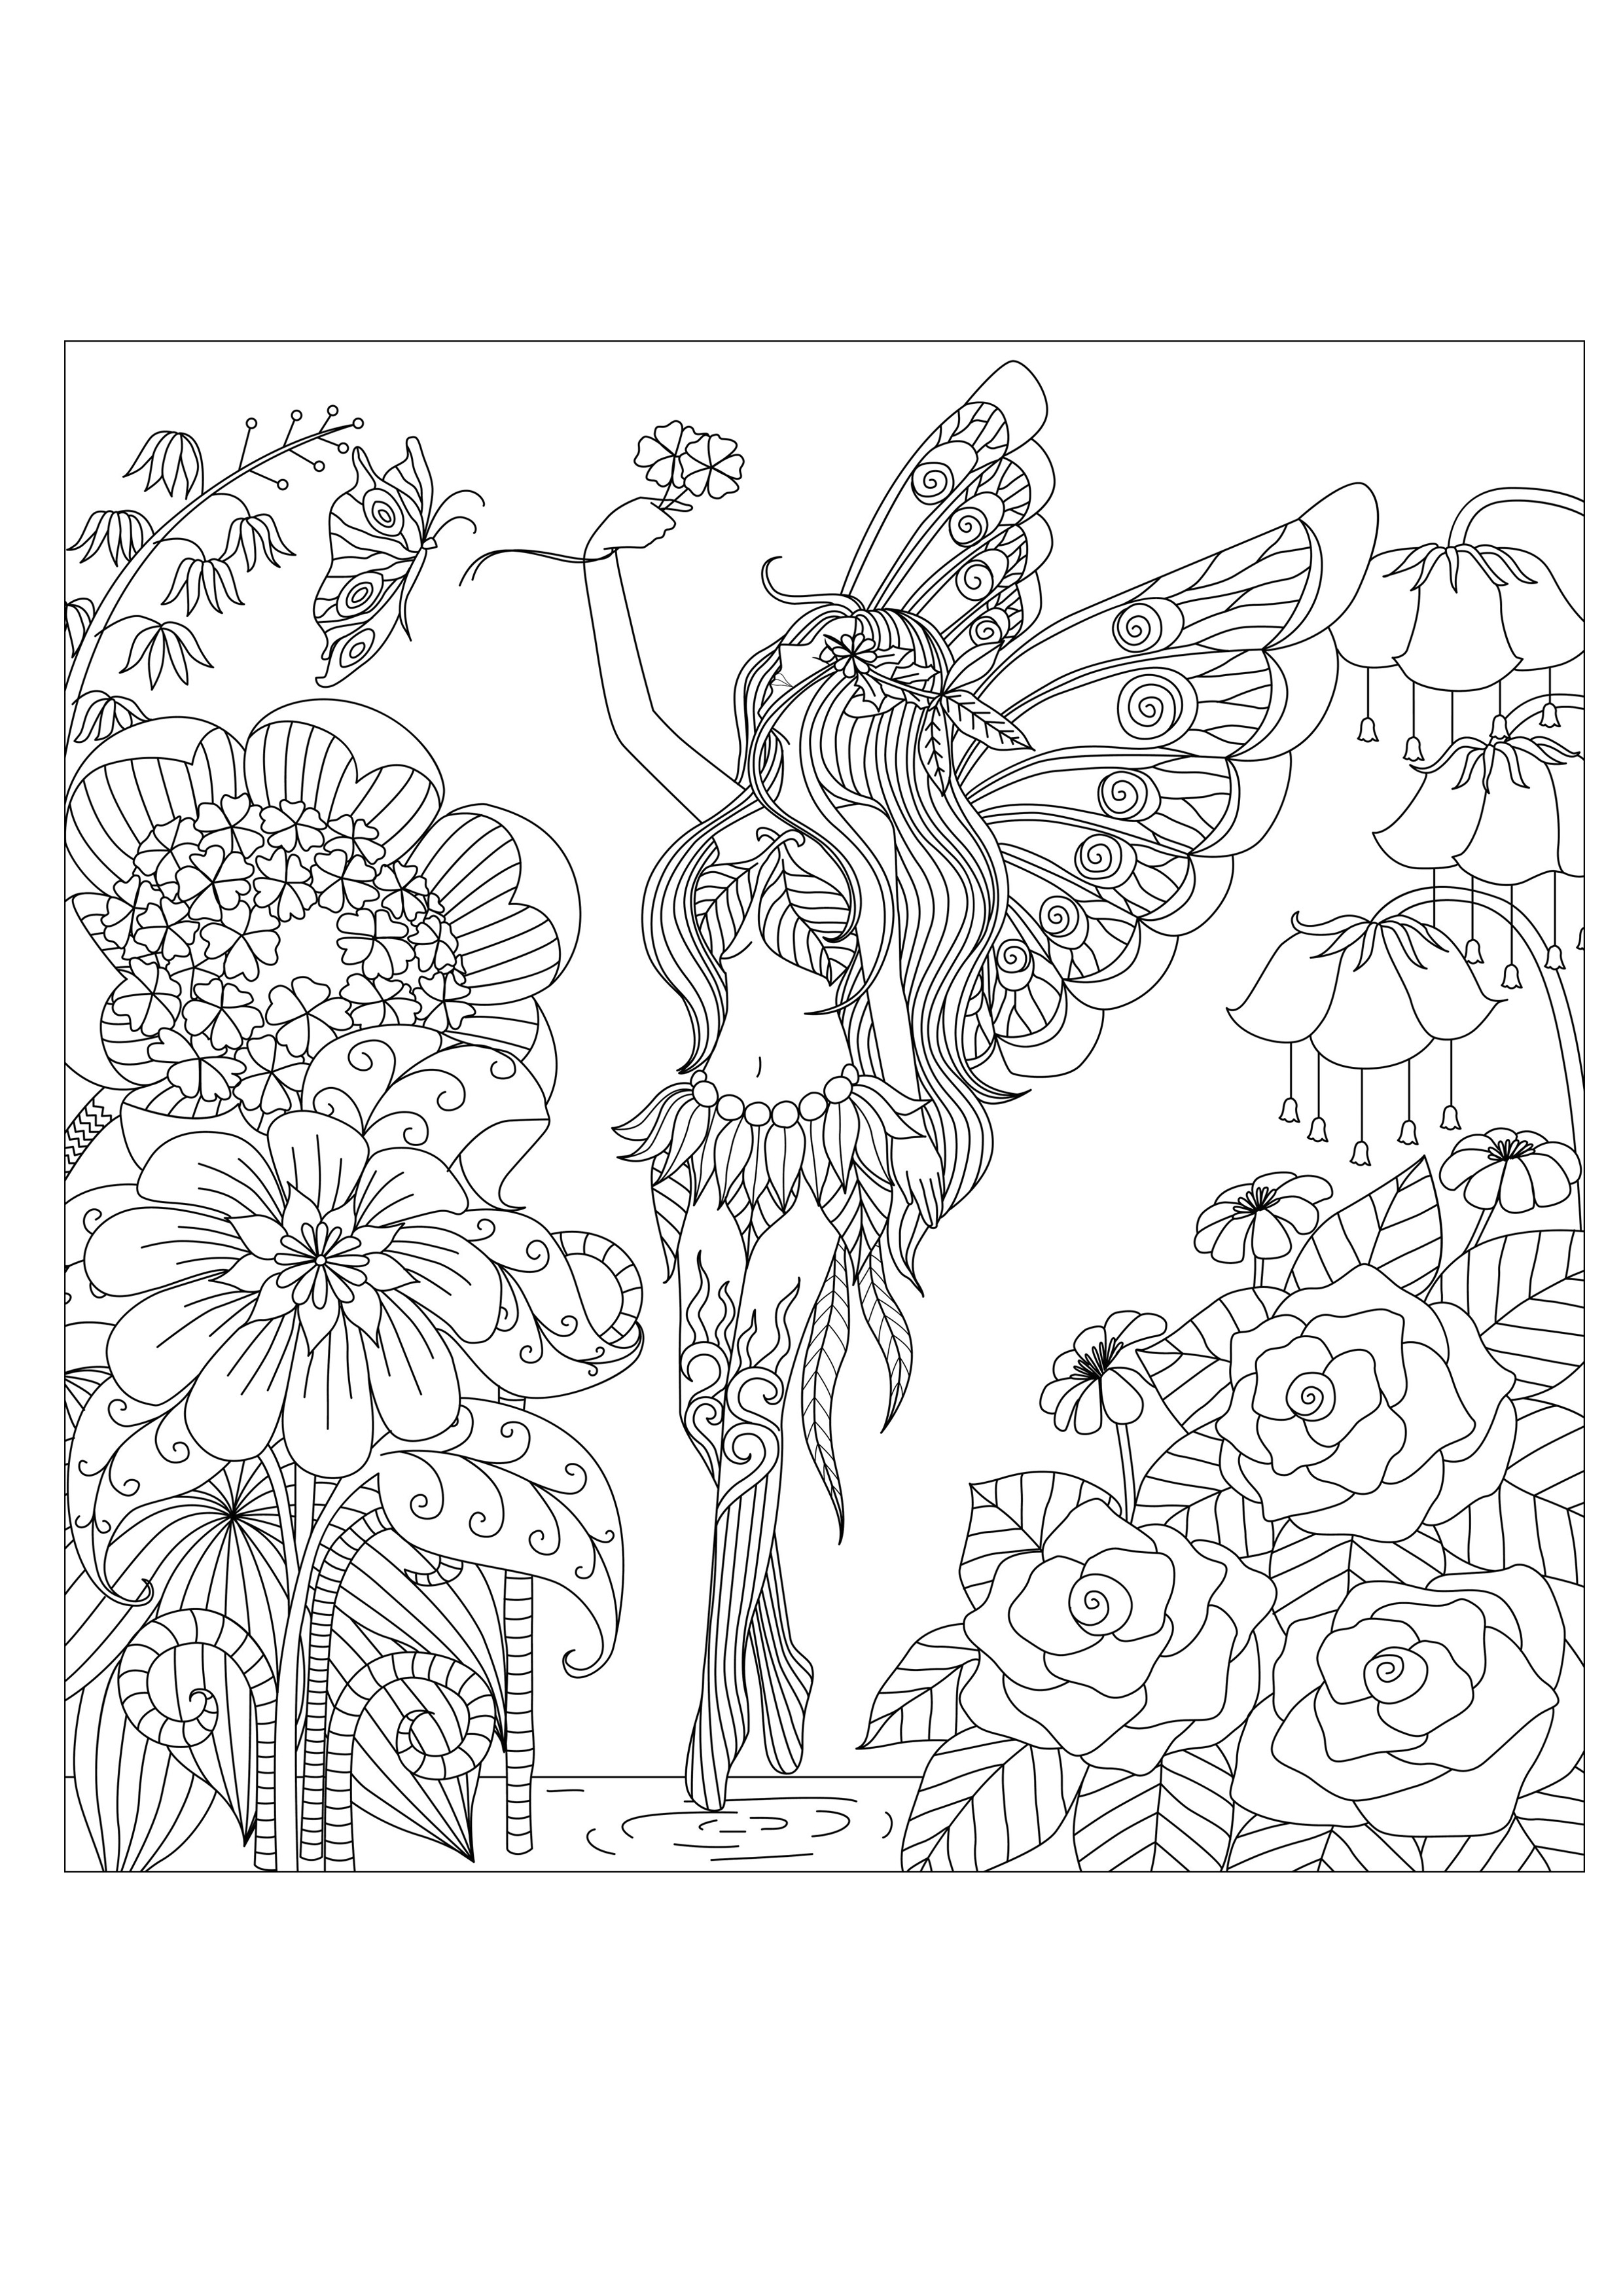 Fairy Queen Coloring Pages Flowers Queen Flowers Adult Coloring Pages